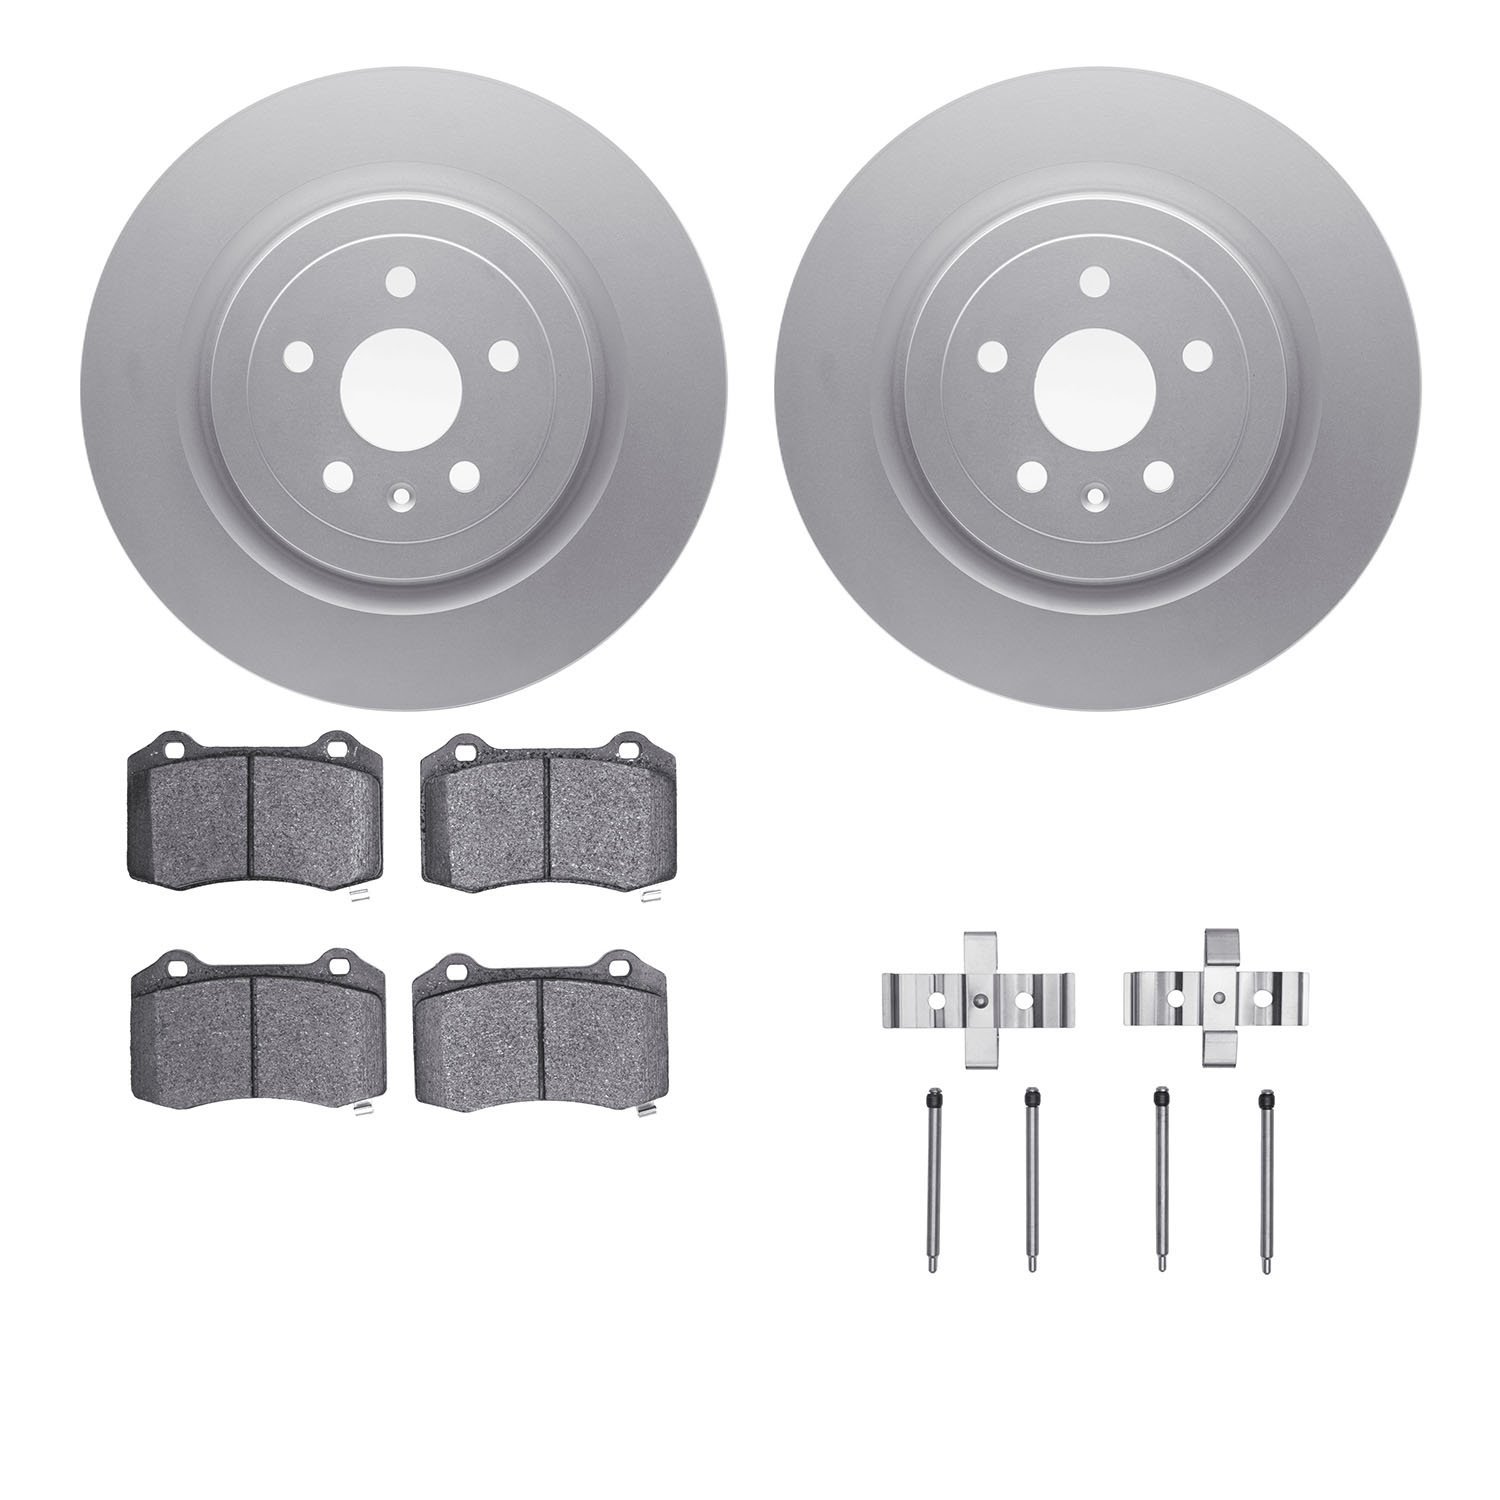 4412-47003 Geospec Brake Rotors with Ultimate-Duty Brake Pads & Hardware, Fits Select GM, Position: Rear